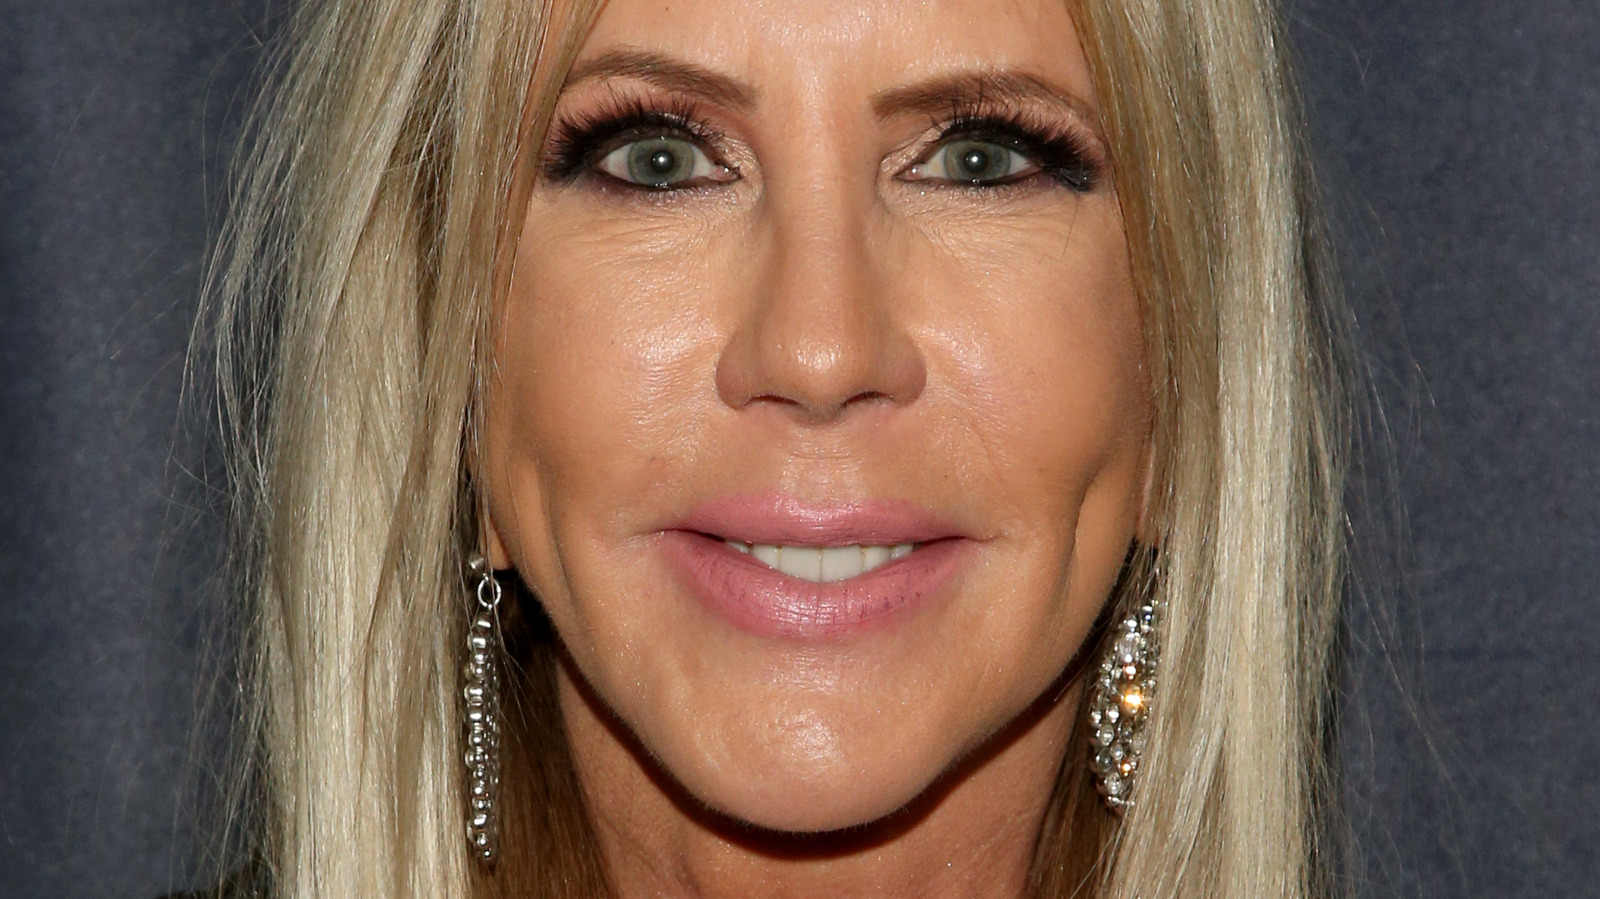 What Vicki Gunvalson has been up to since leaving RHOC